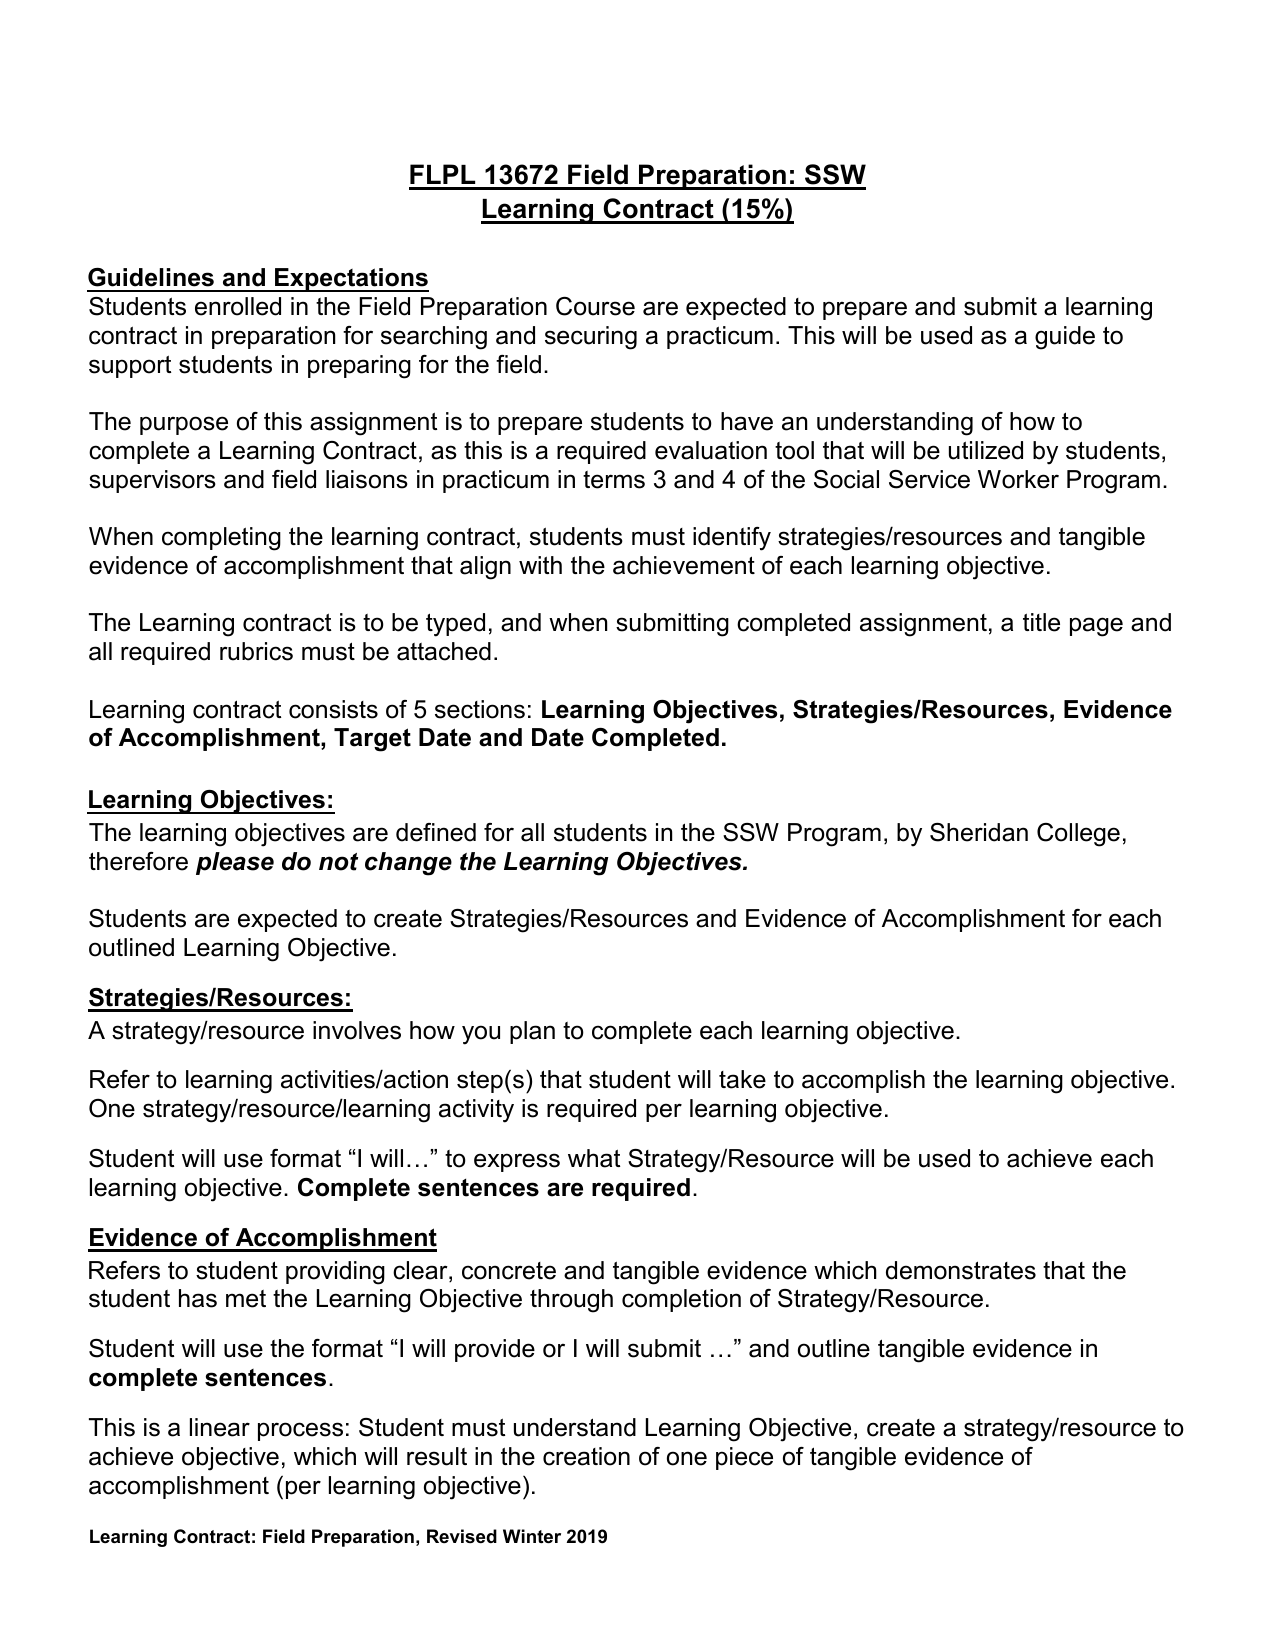 Learning Contract 15 2019